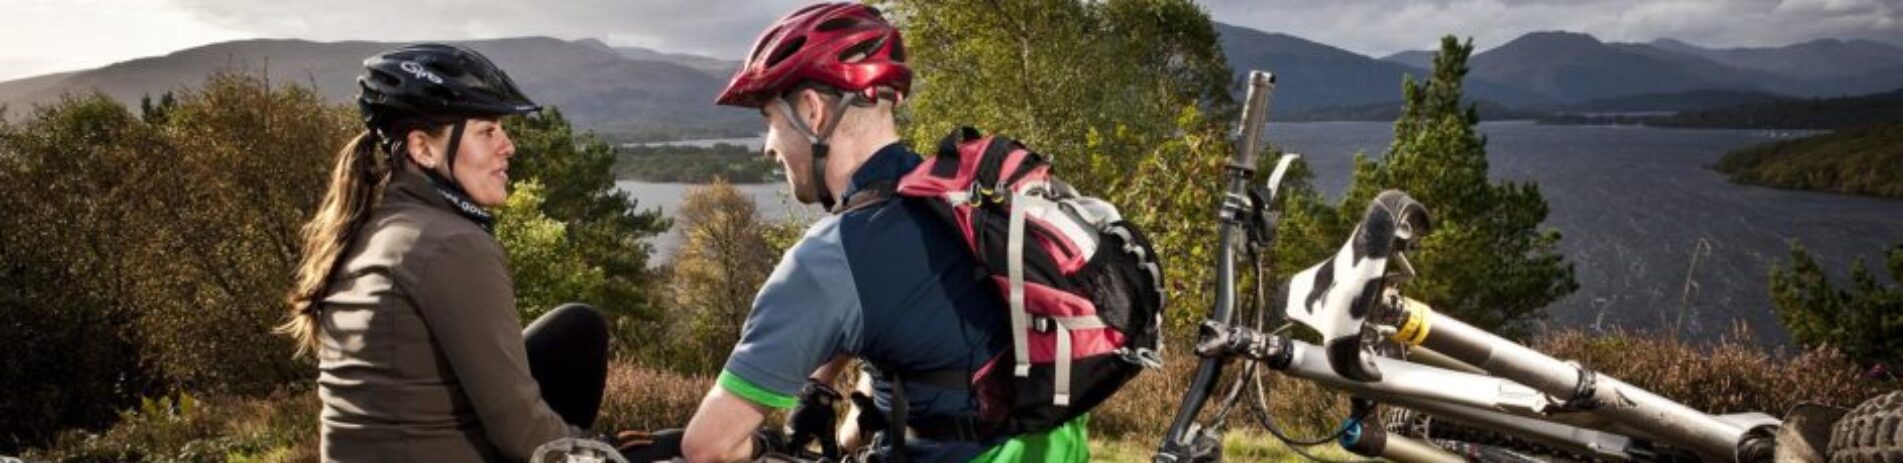 woman-and-man-in-biking-gear-with-helmets-on-next-to-their-bikes-staring-in-the-distance-over-loch-lomond